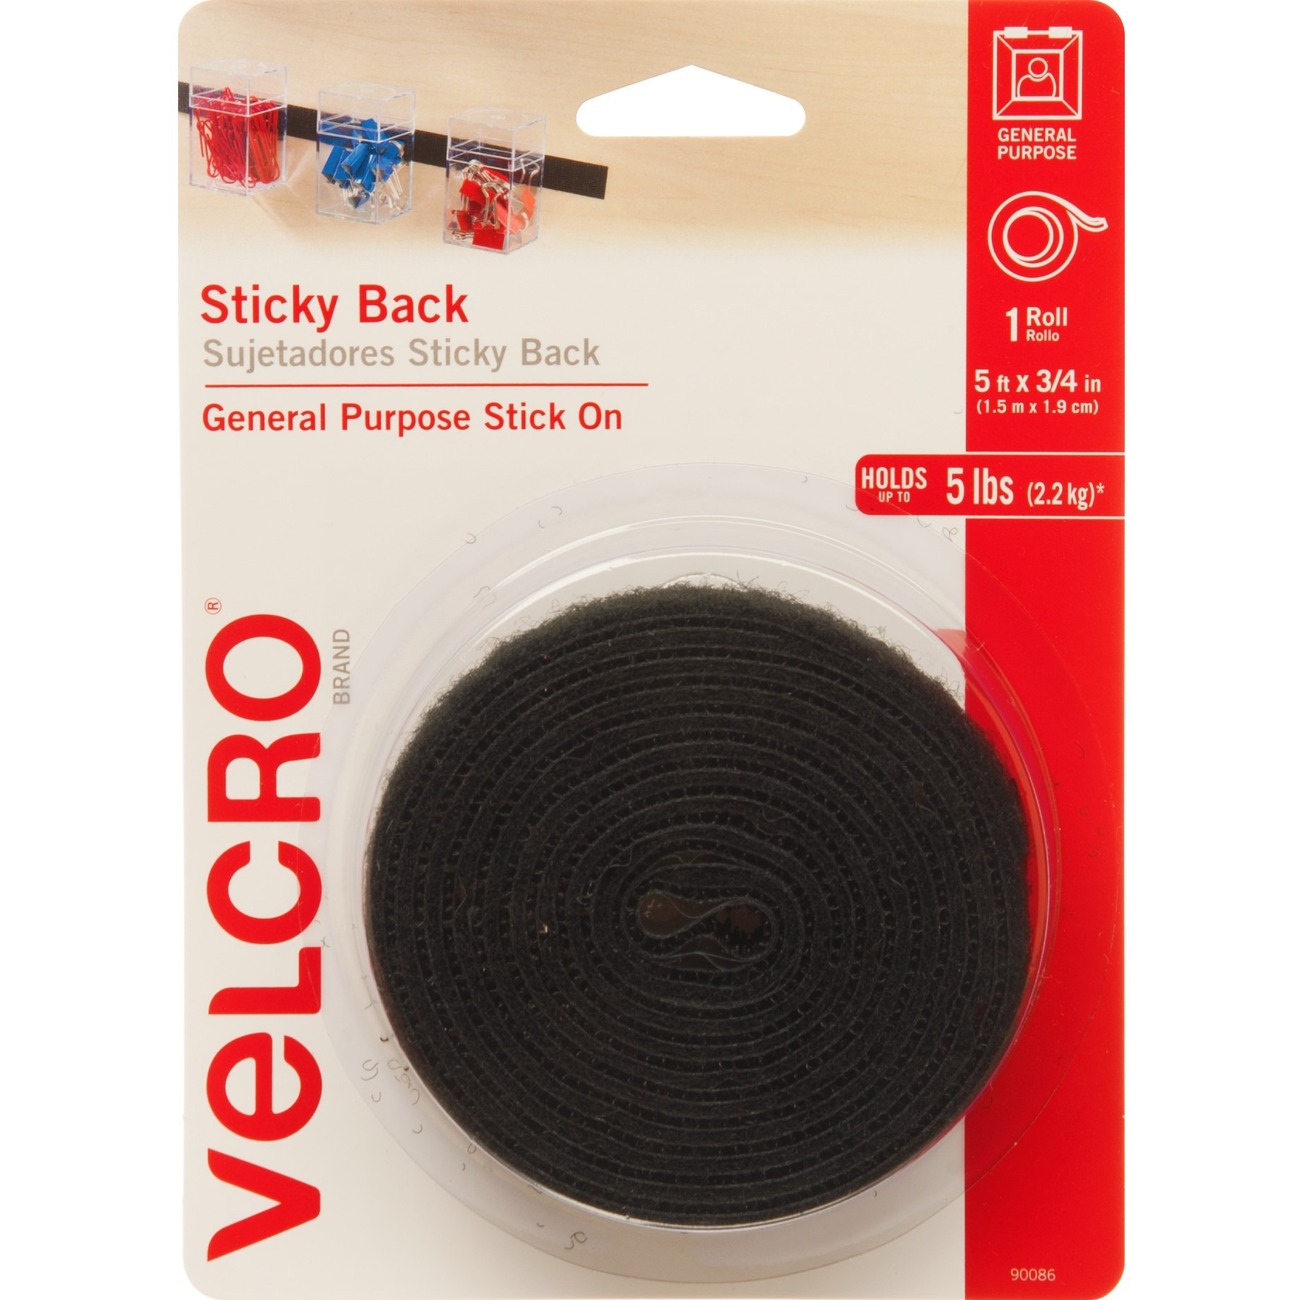 VELCRO Brand - Industrial Strength - Extreme - 1 Wide Tape, 10' - Black